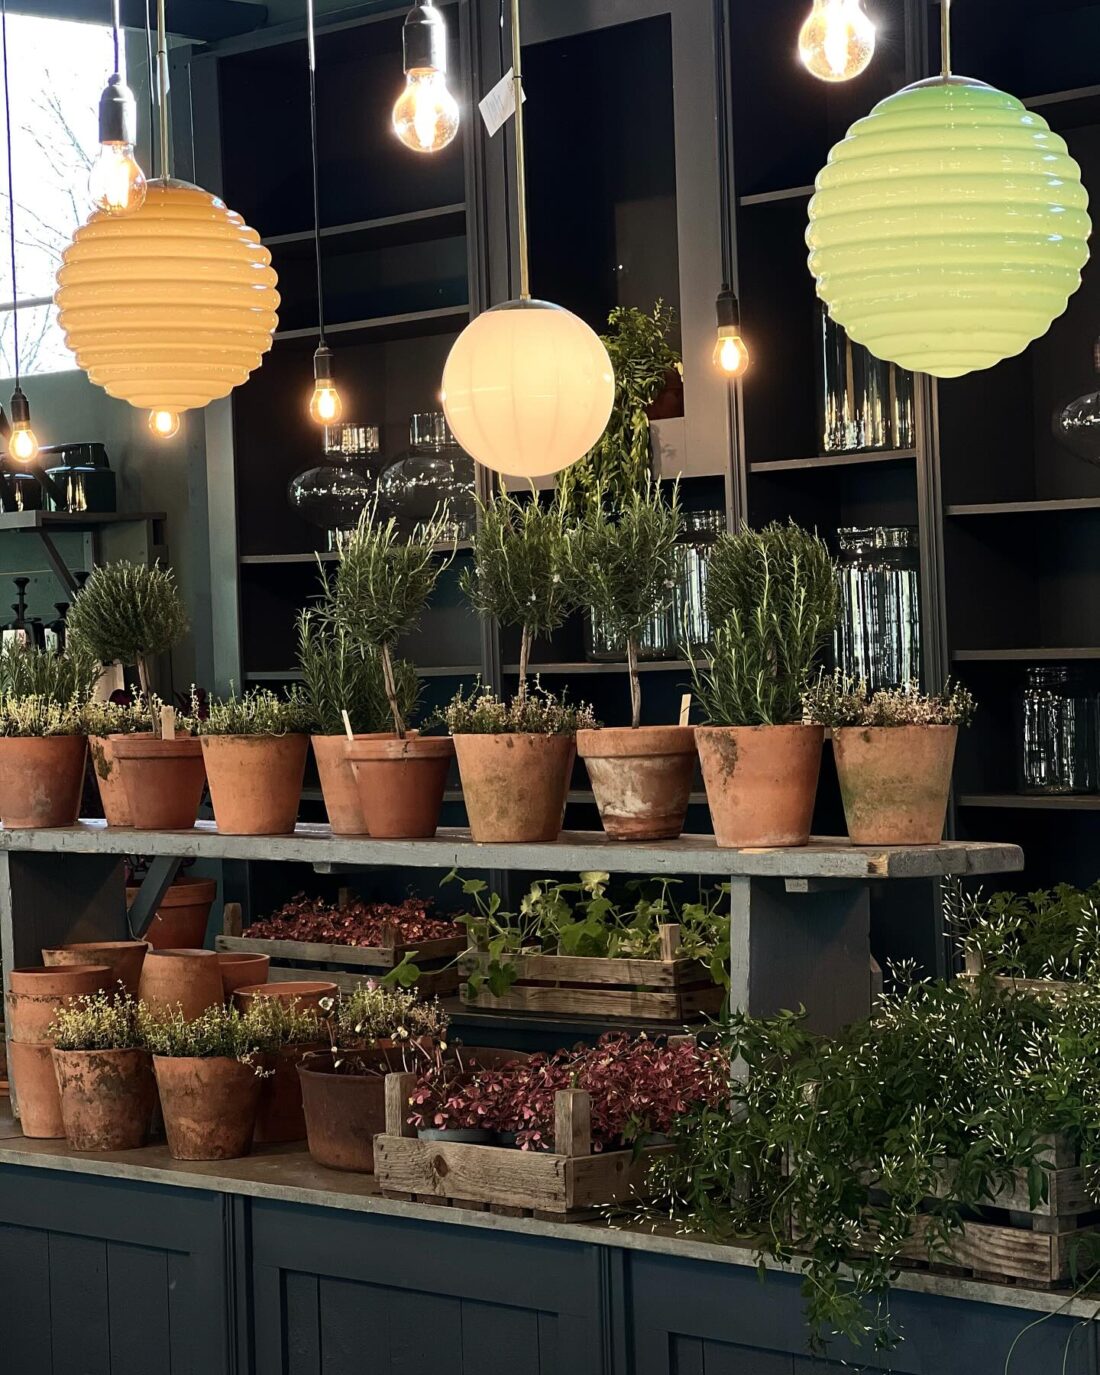 A variety of potted plants displayed on shelves under hanging paper lanterns in a well-lit room.